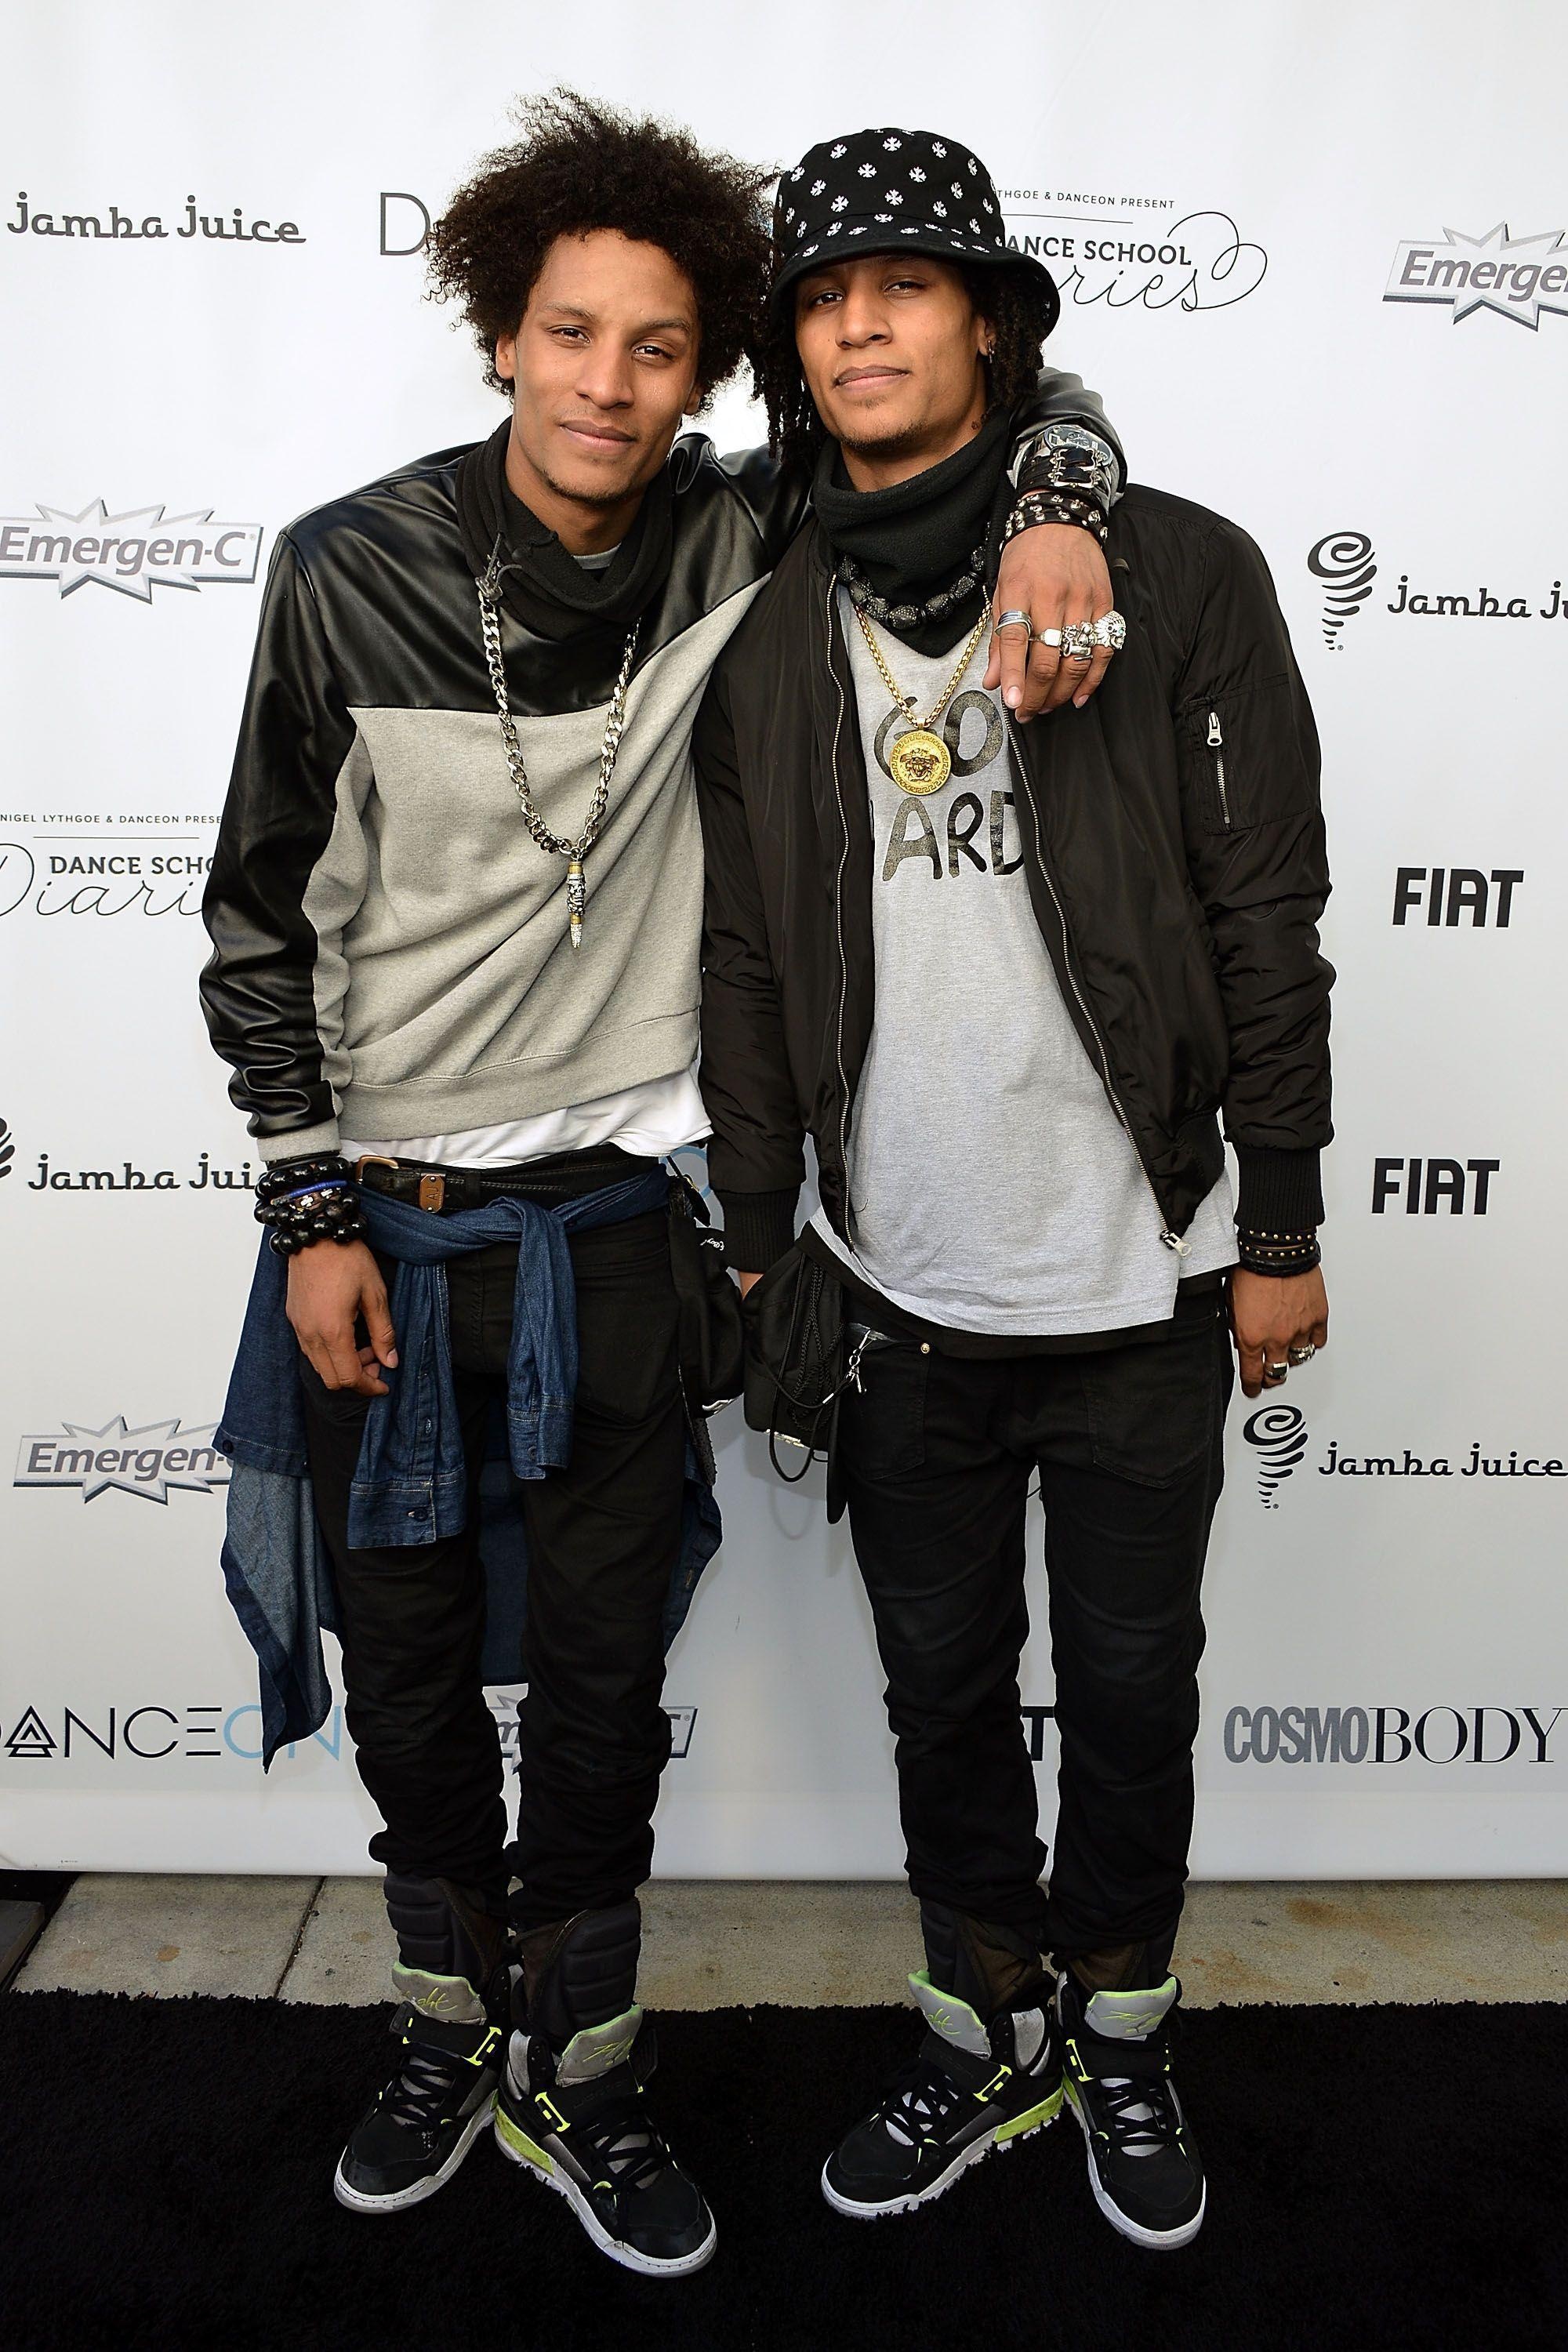 Les Twins Wallpapers (26+ images inside)